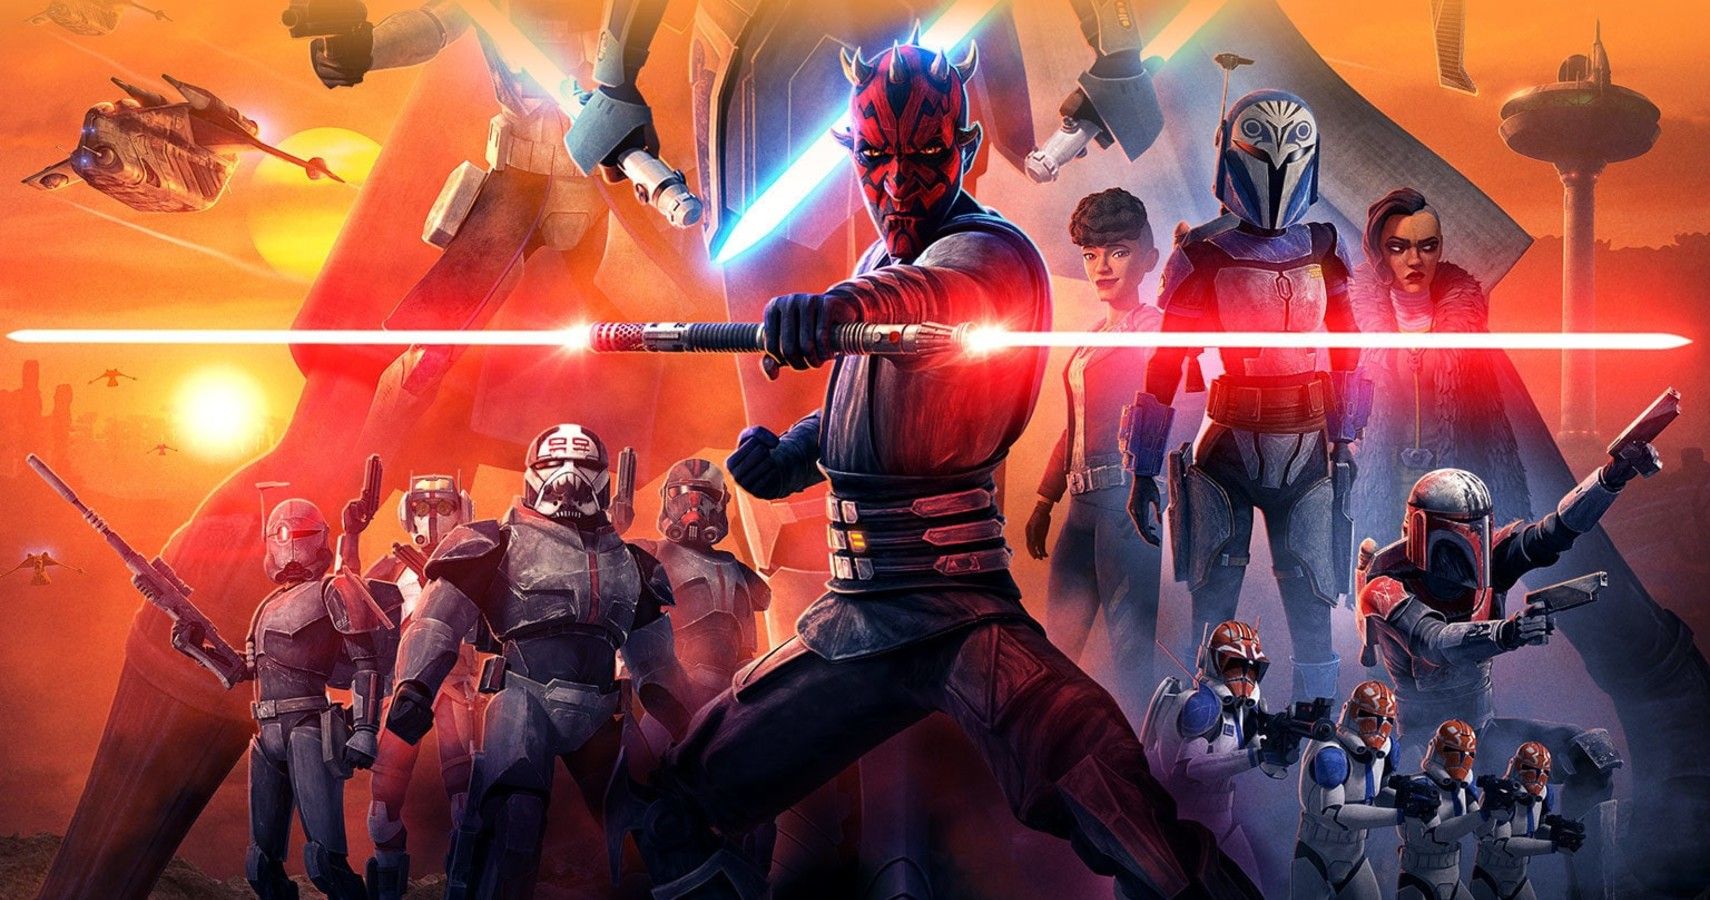 star-wars-the-clone-wars-5-plausible-fan-theories-about-the-final-season-that-make-too-much